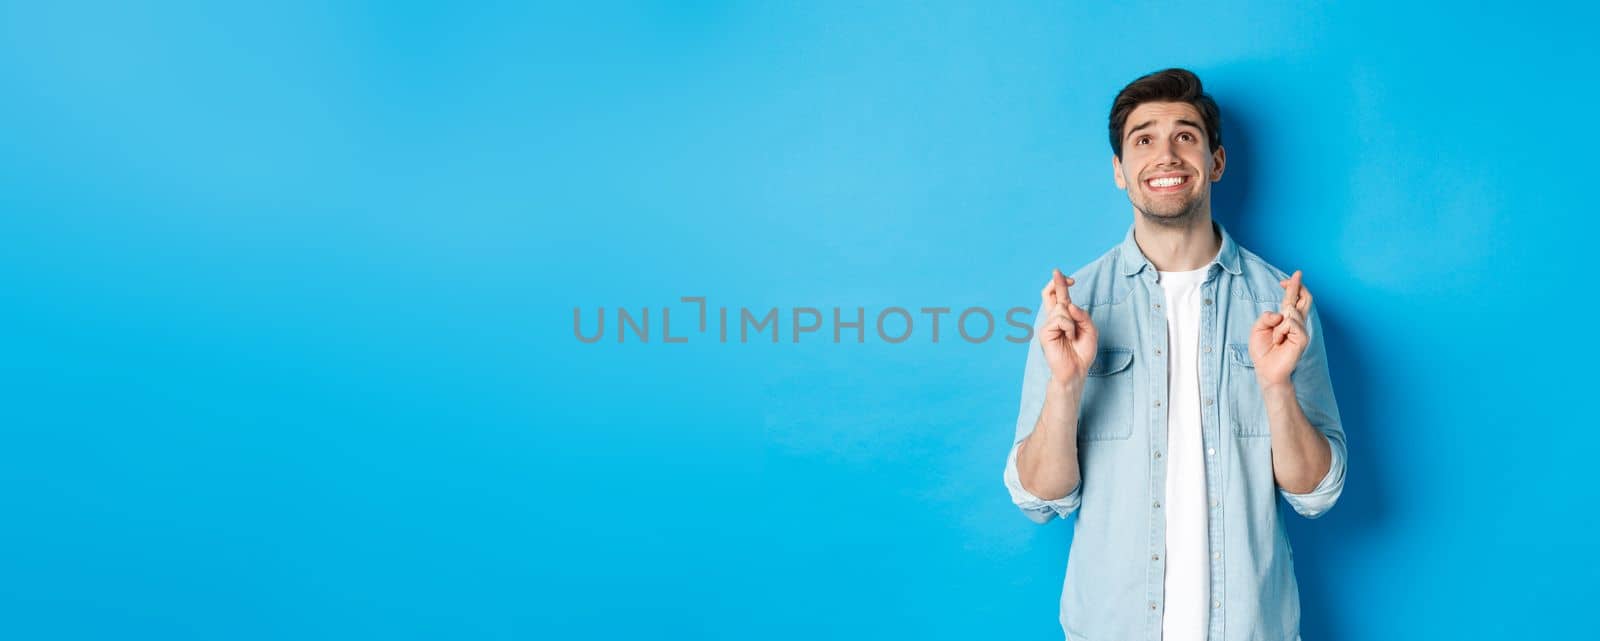 Lucky guy praying and making wish with crossed fingers, looking up with pleading face, standing against blue background.